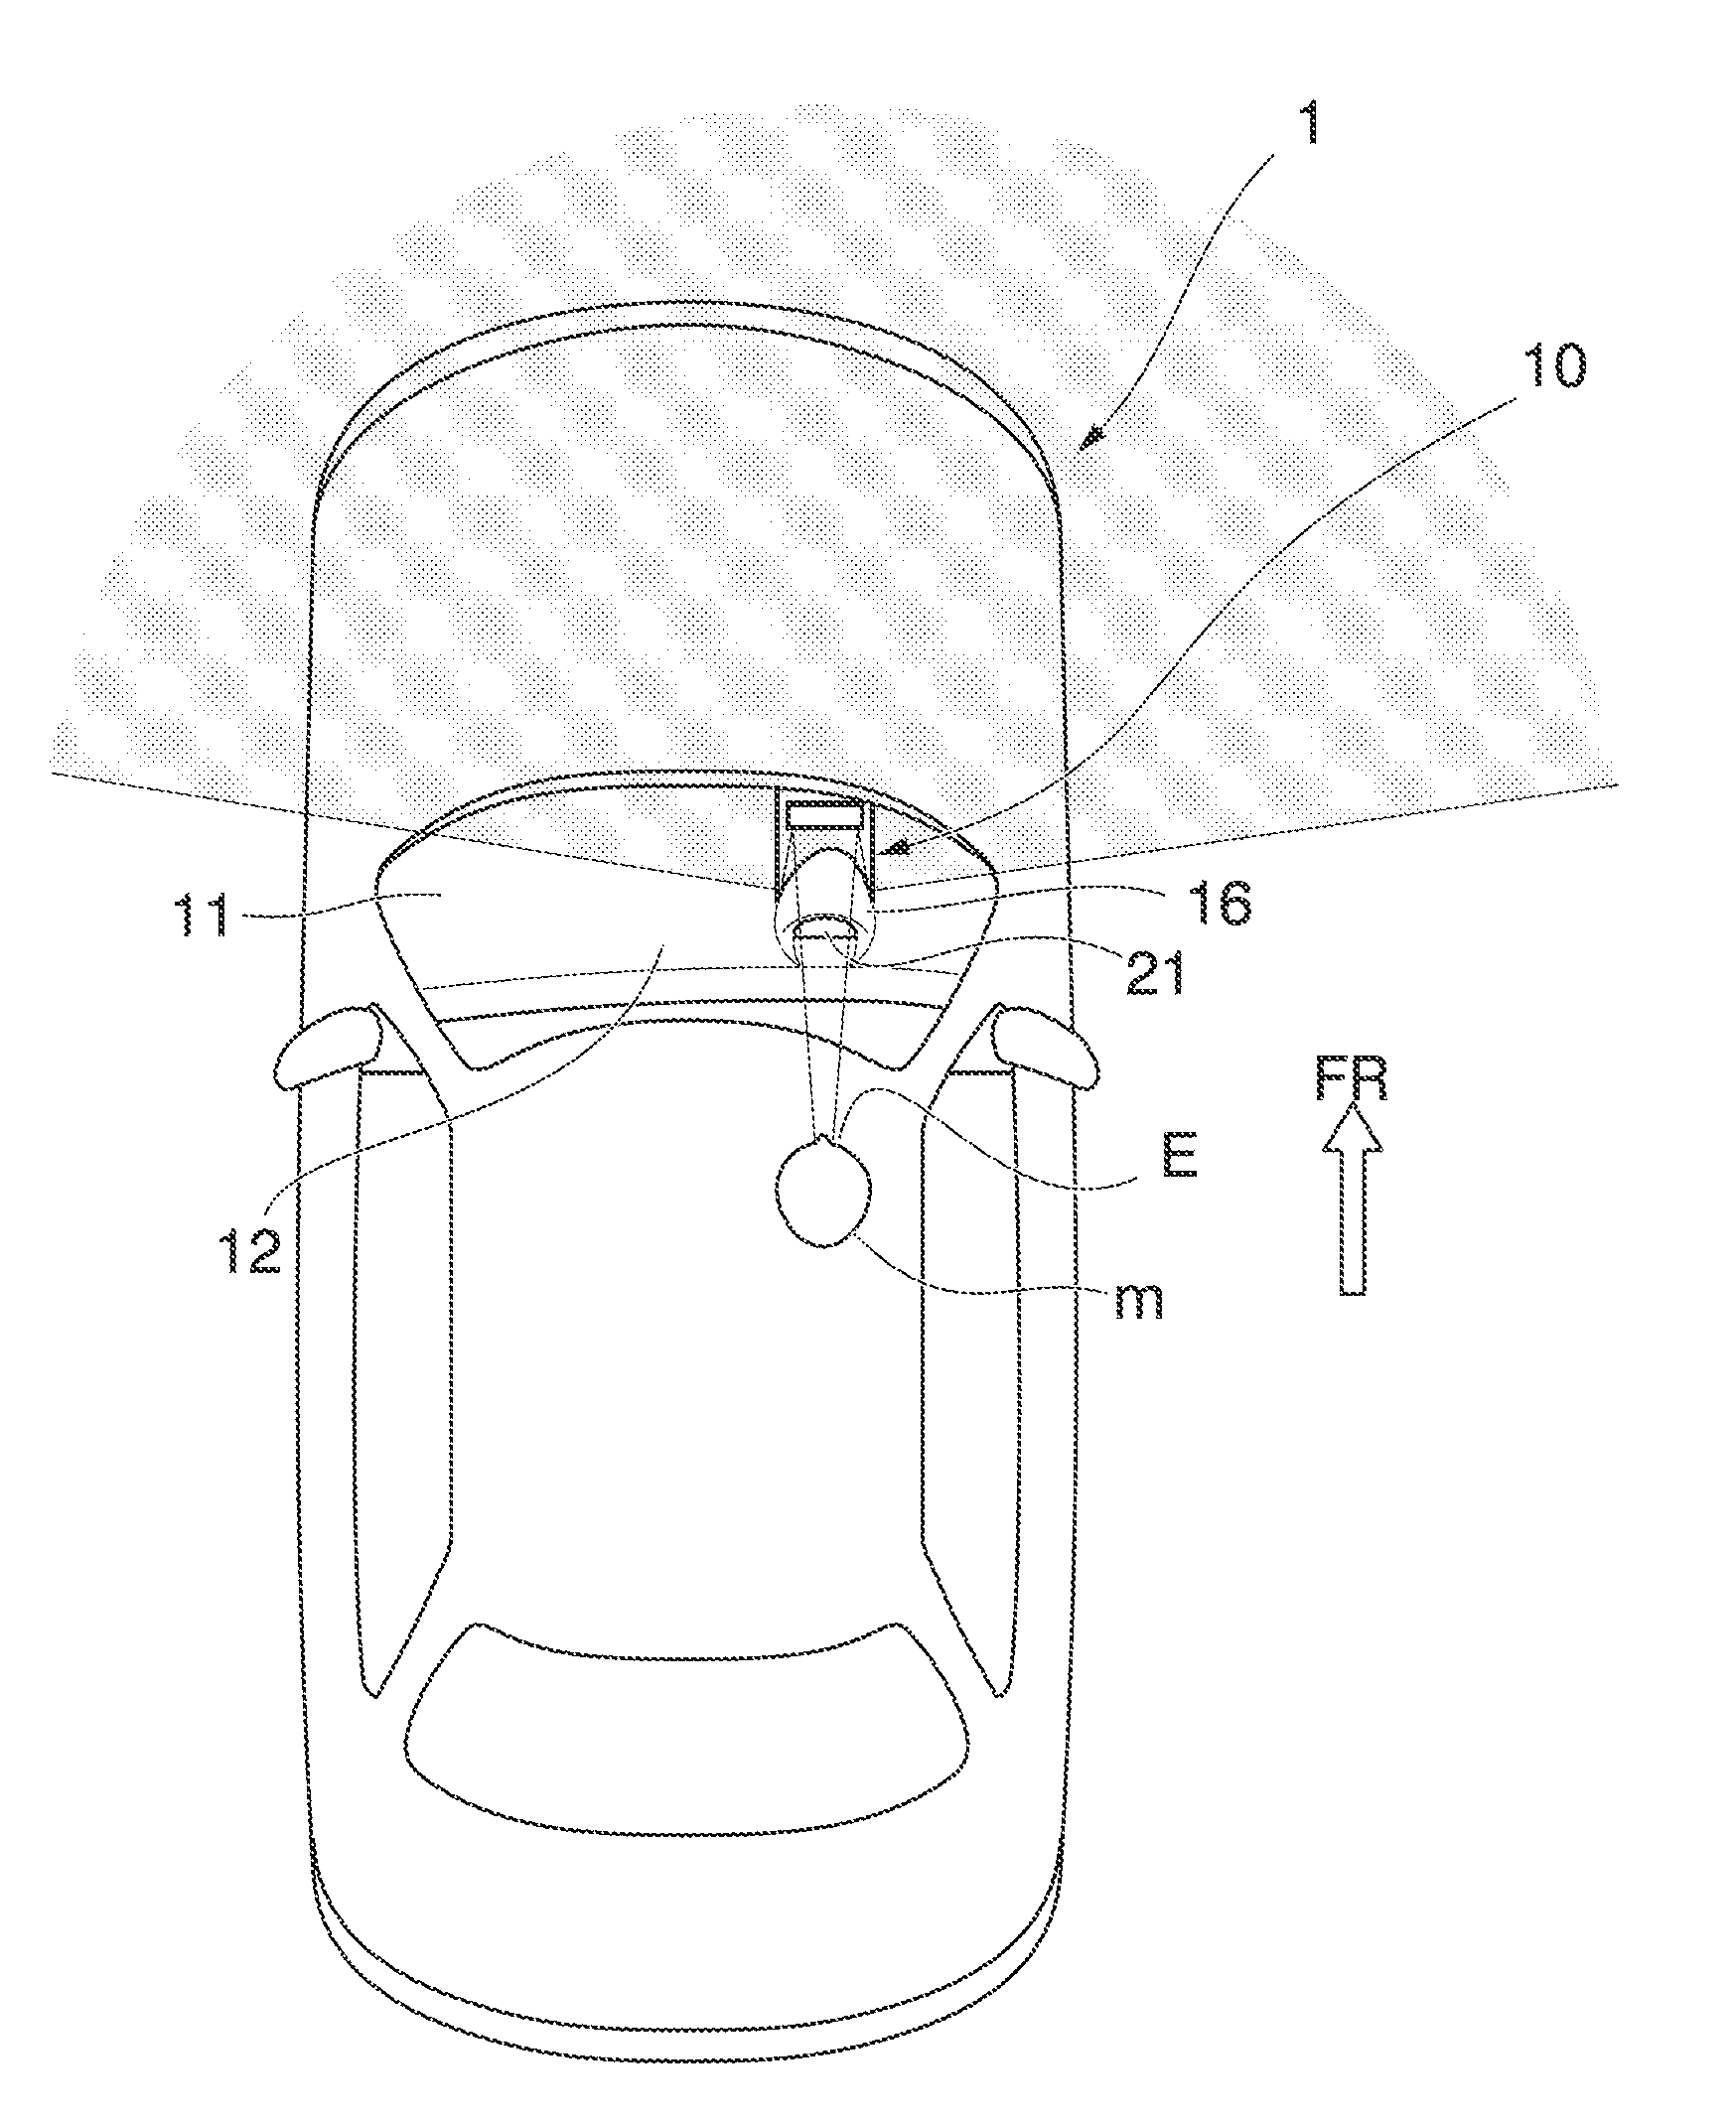 Device for visually confirming forward direction